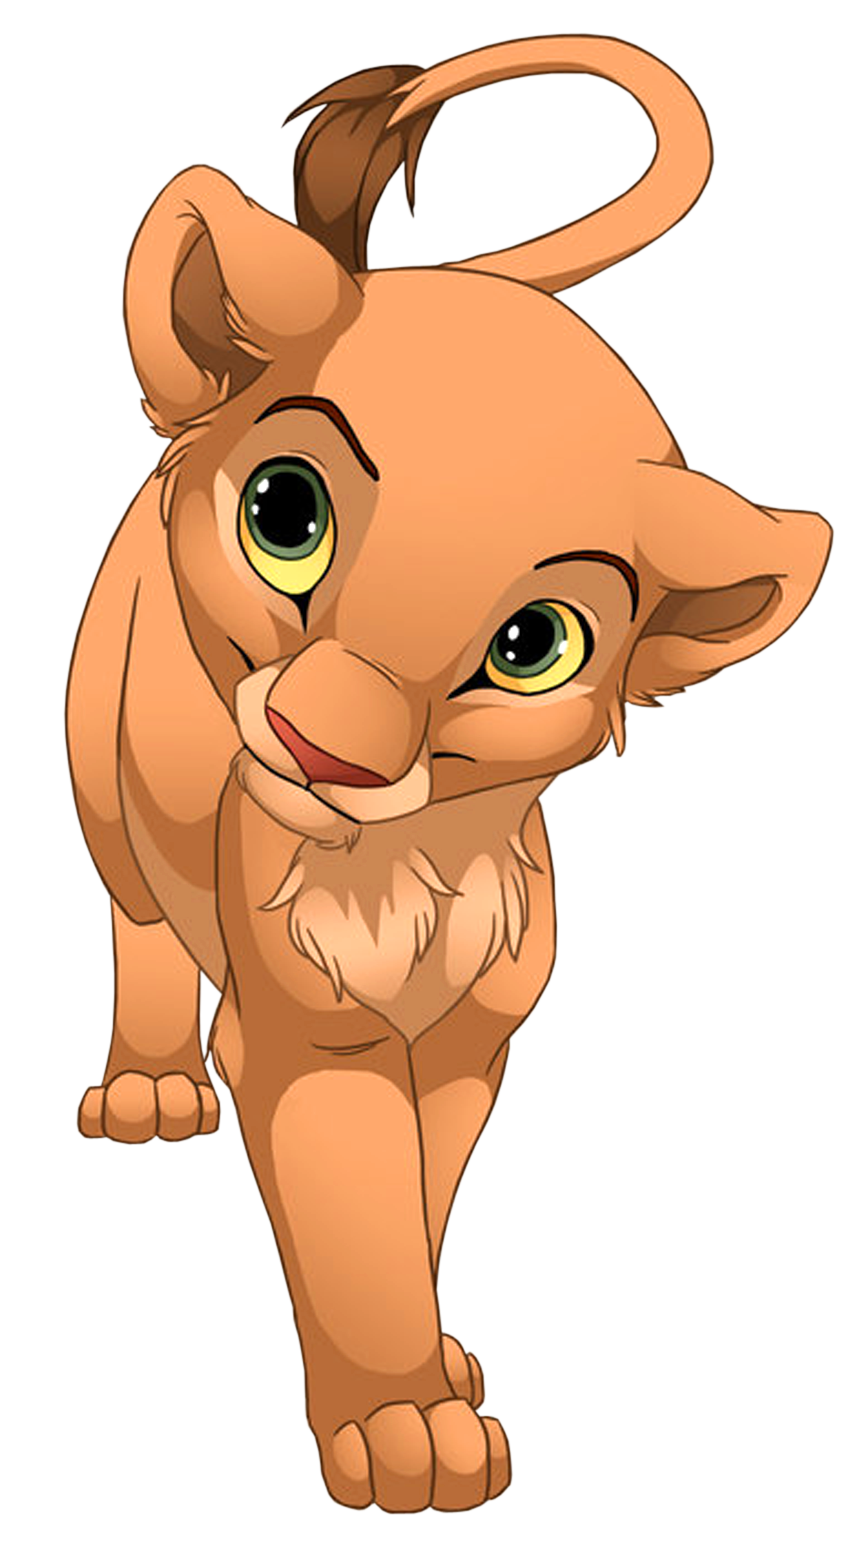 Kiara the lion king. Lions clipart character